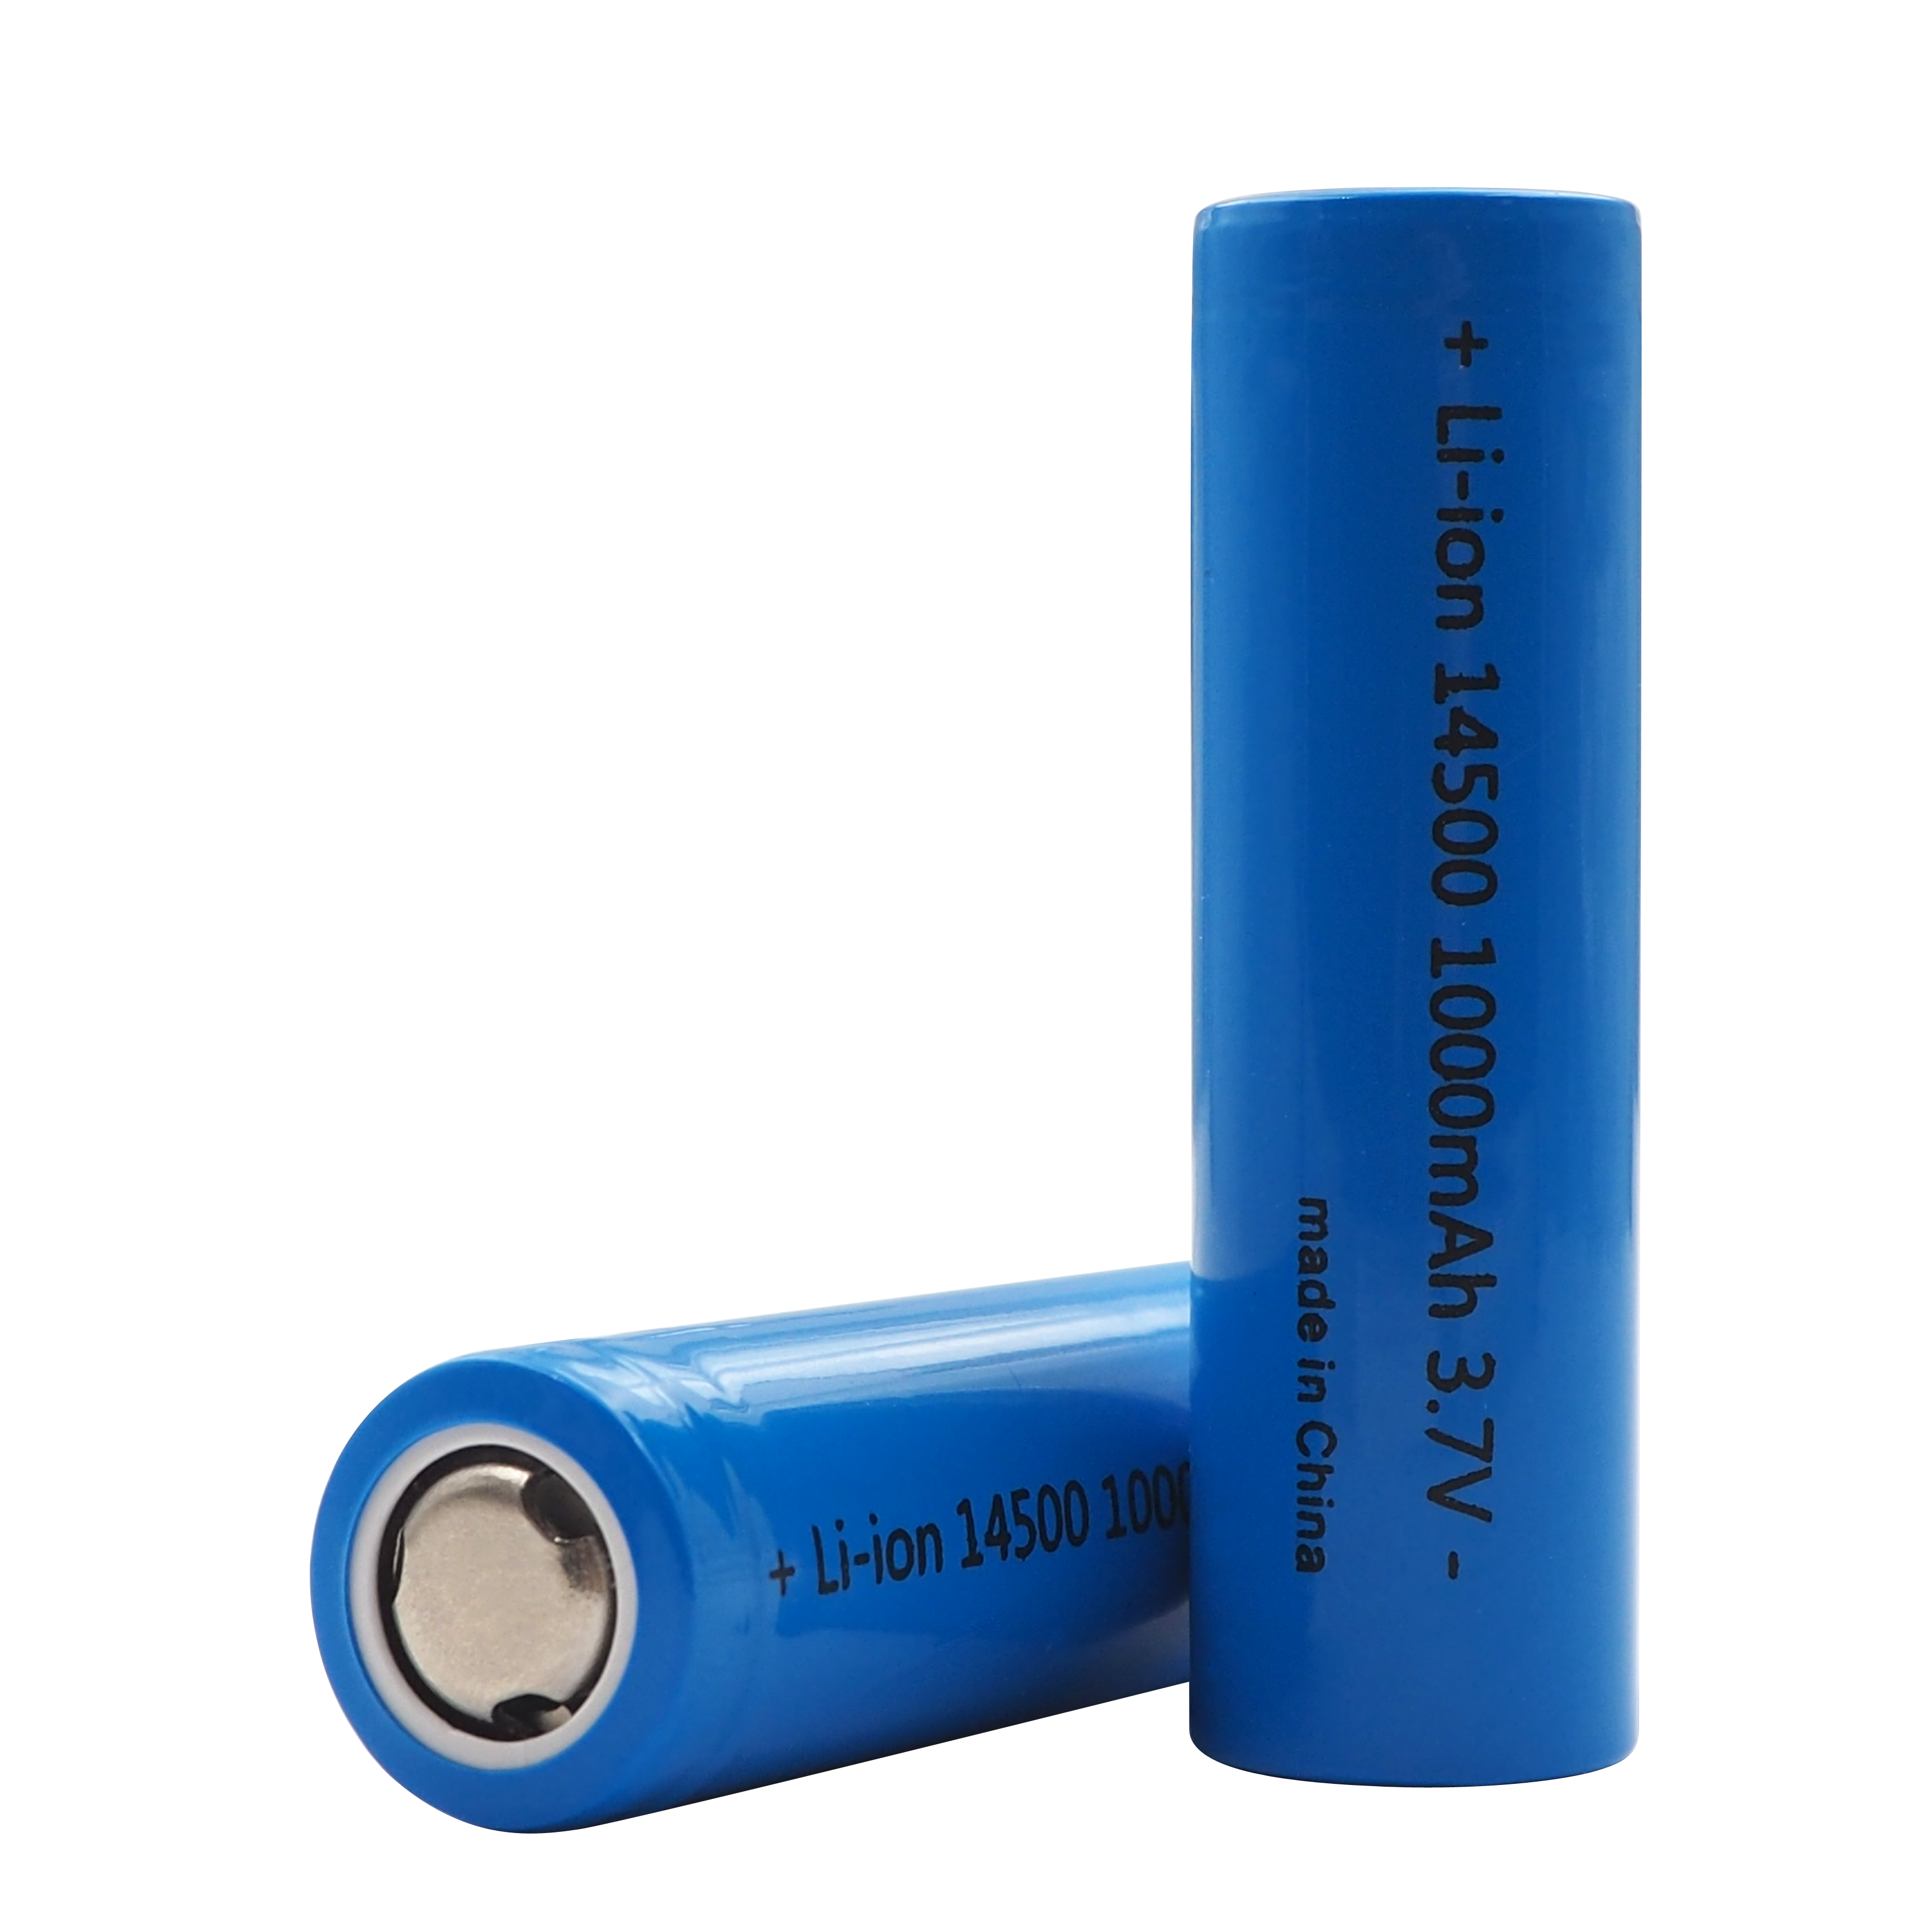 KP 16500 Lithium-ion battery 3.6V - 3.7V with a capacity of 1200mAh 